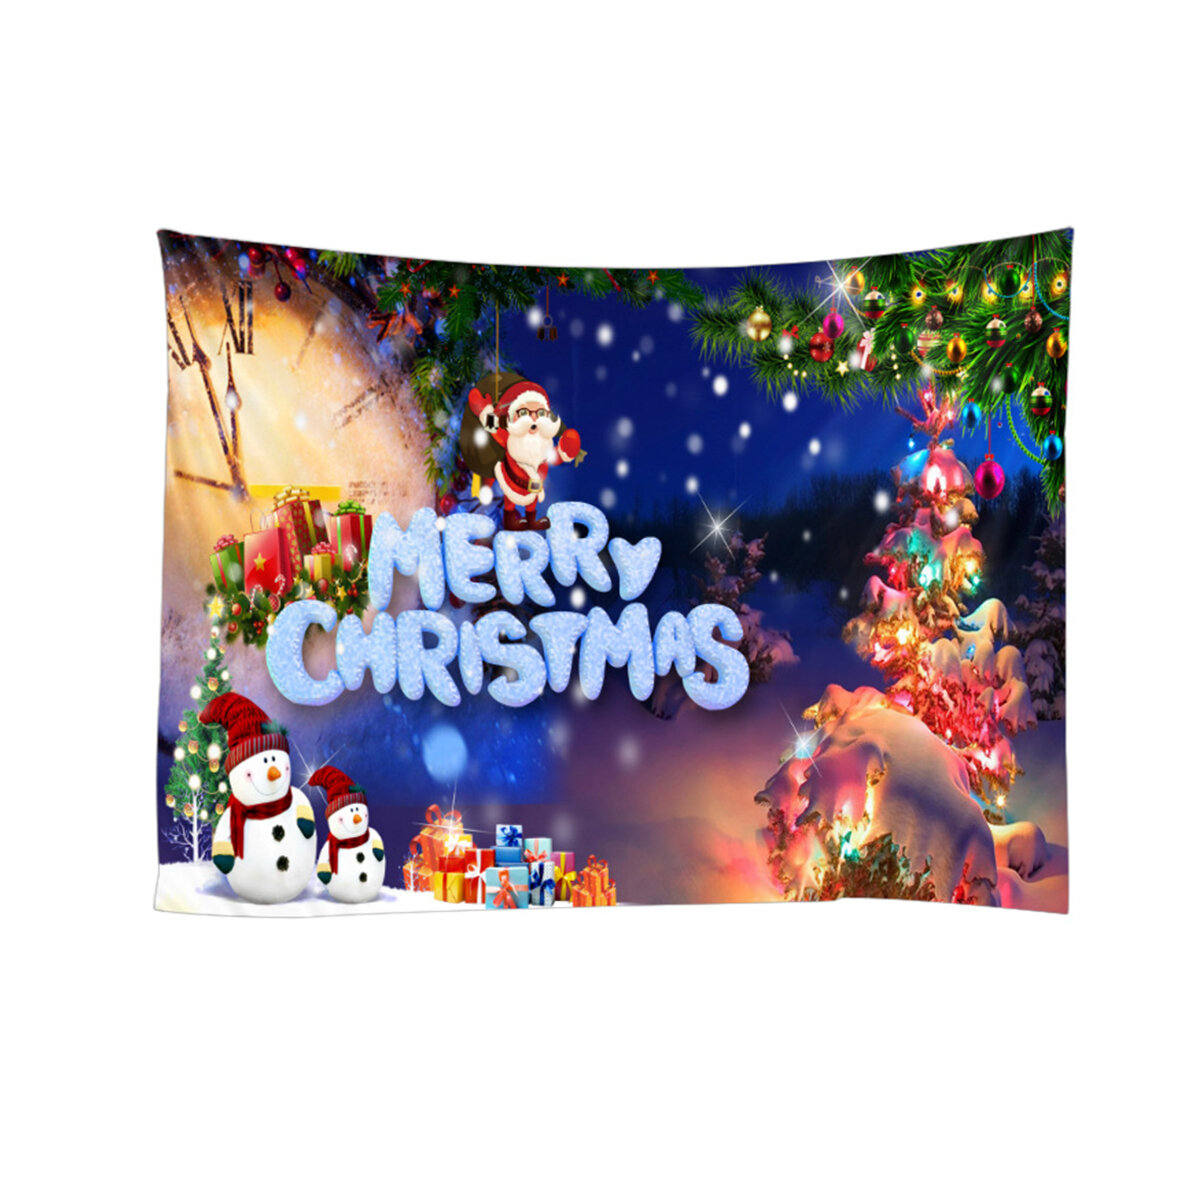 Christmas Santa Claus Tapestry Wall Hanging Winter Bedspread Throw Blanket Photography Backdrop Back